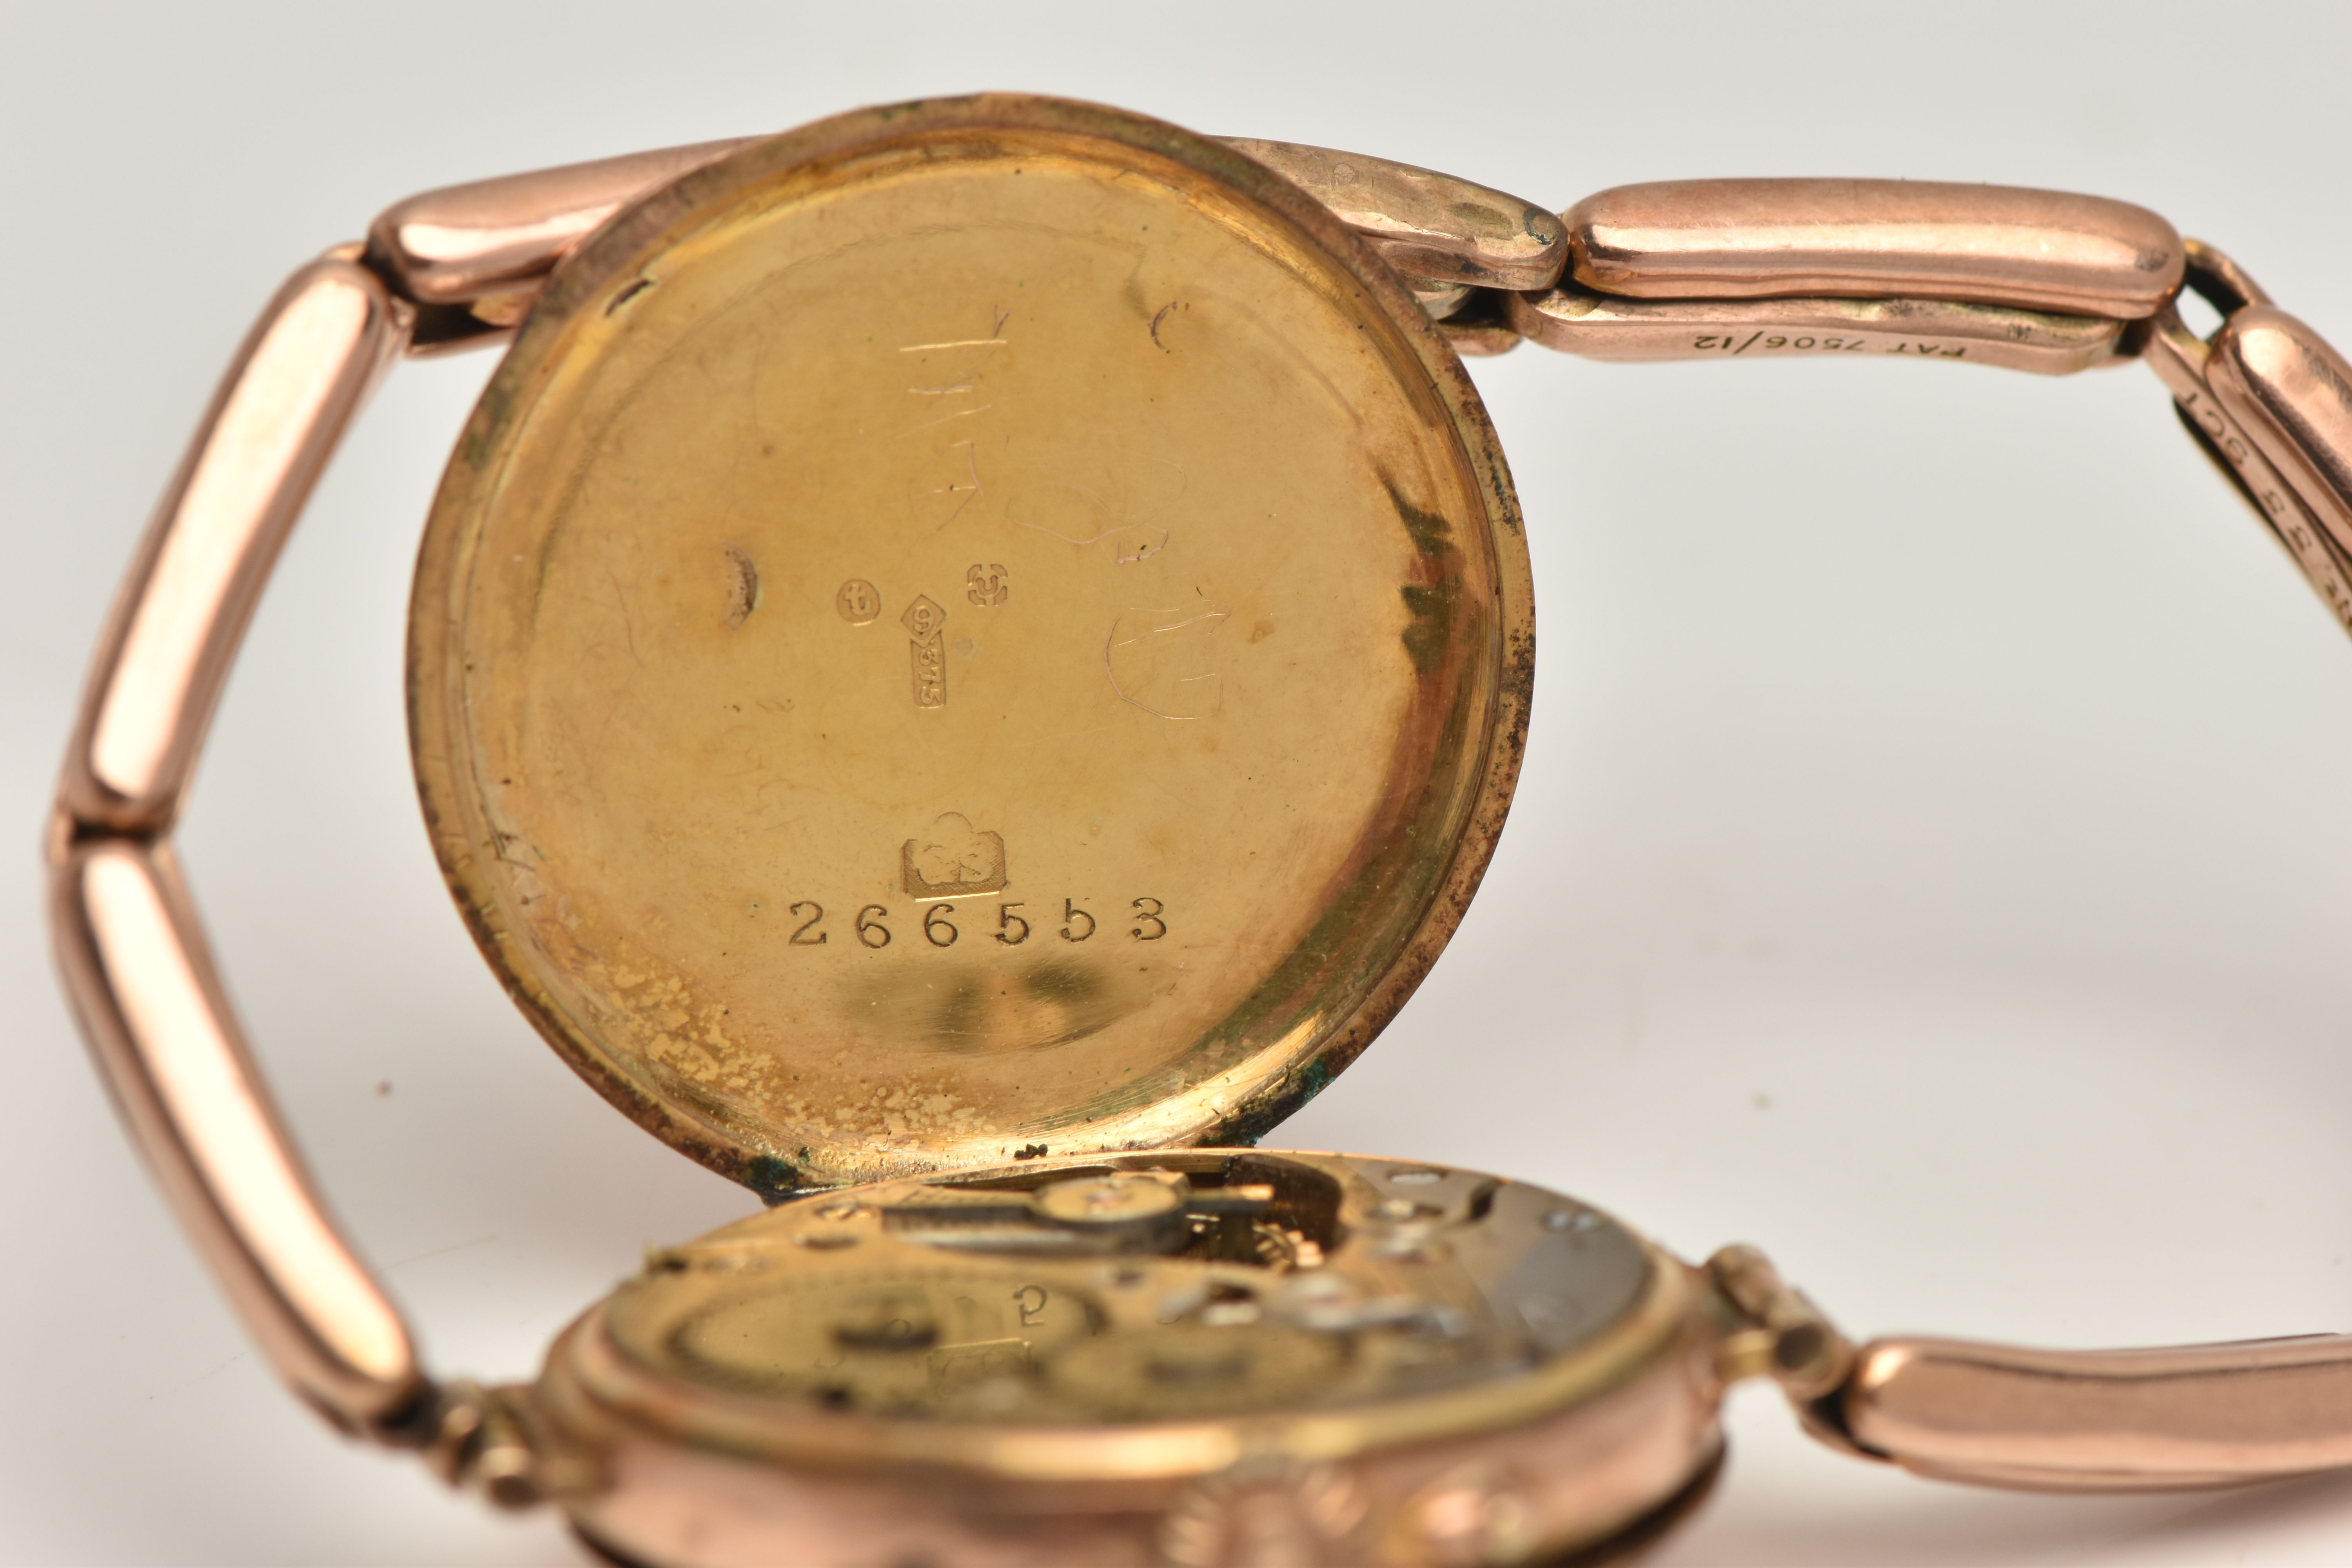 AN EARLY 20TH CENTURY 9CT GOLD LADYS WRISTWATCH, hand wound movement, round dial, Roman numerals, - Image 4 of 6